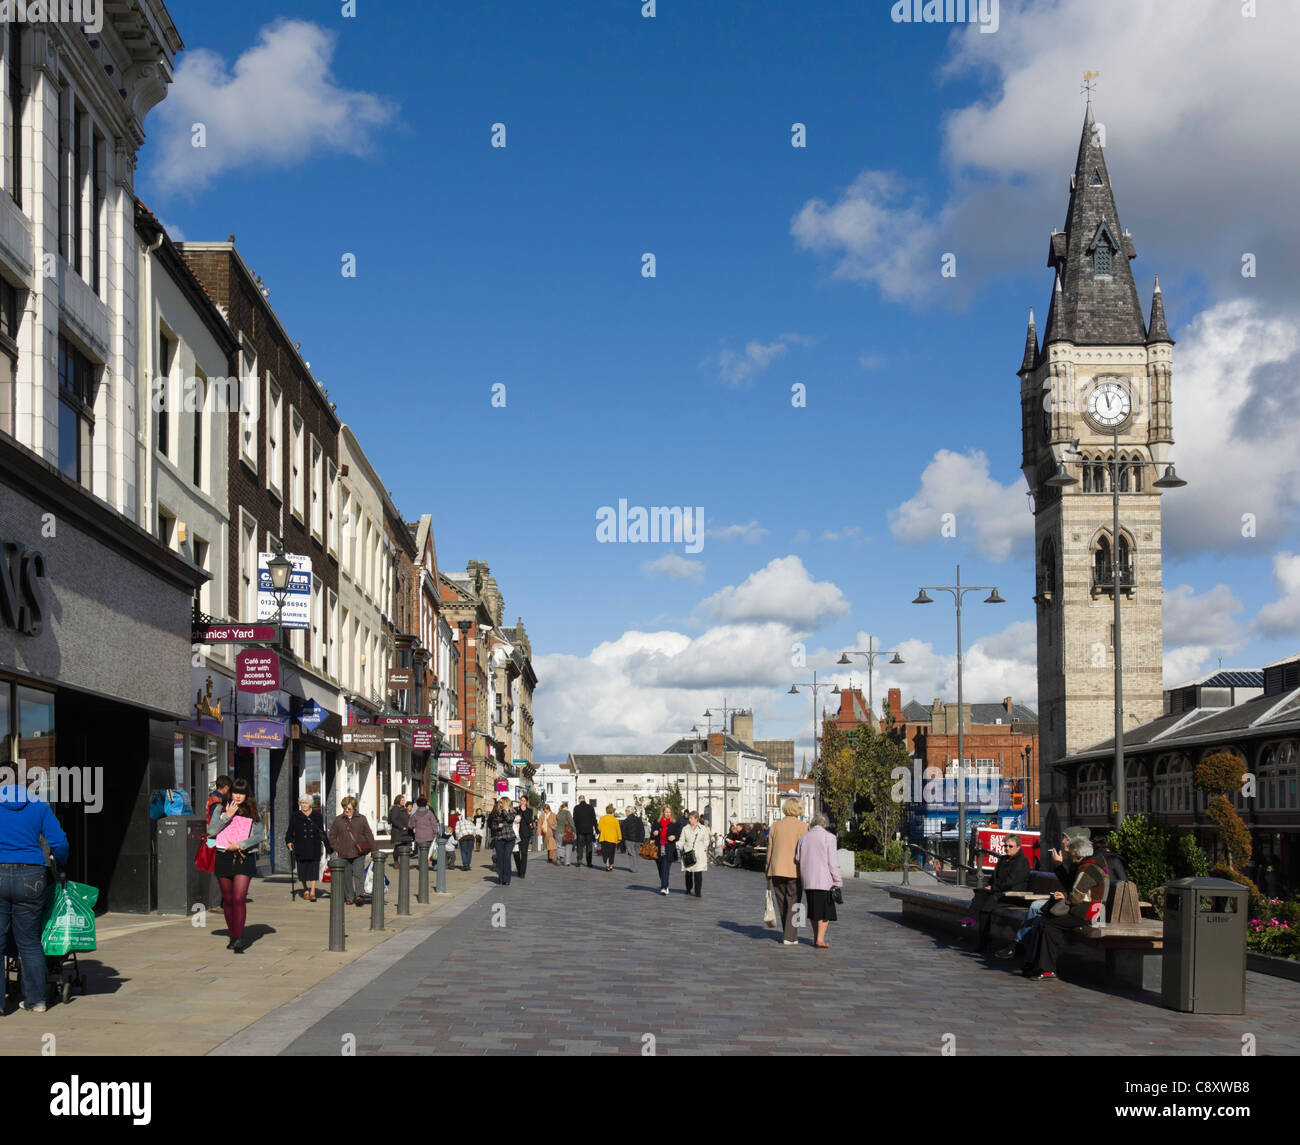 Darlington, north-east England: town centre with Binns store, old market building and clock tower. Stock Photo